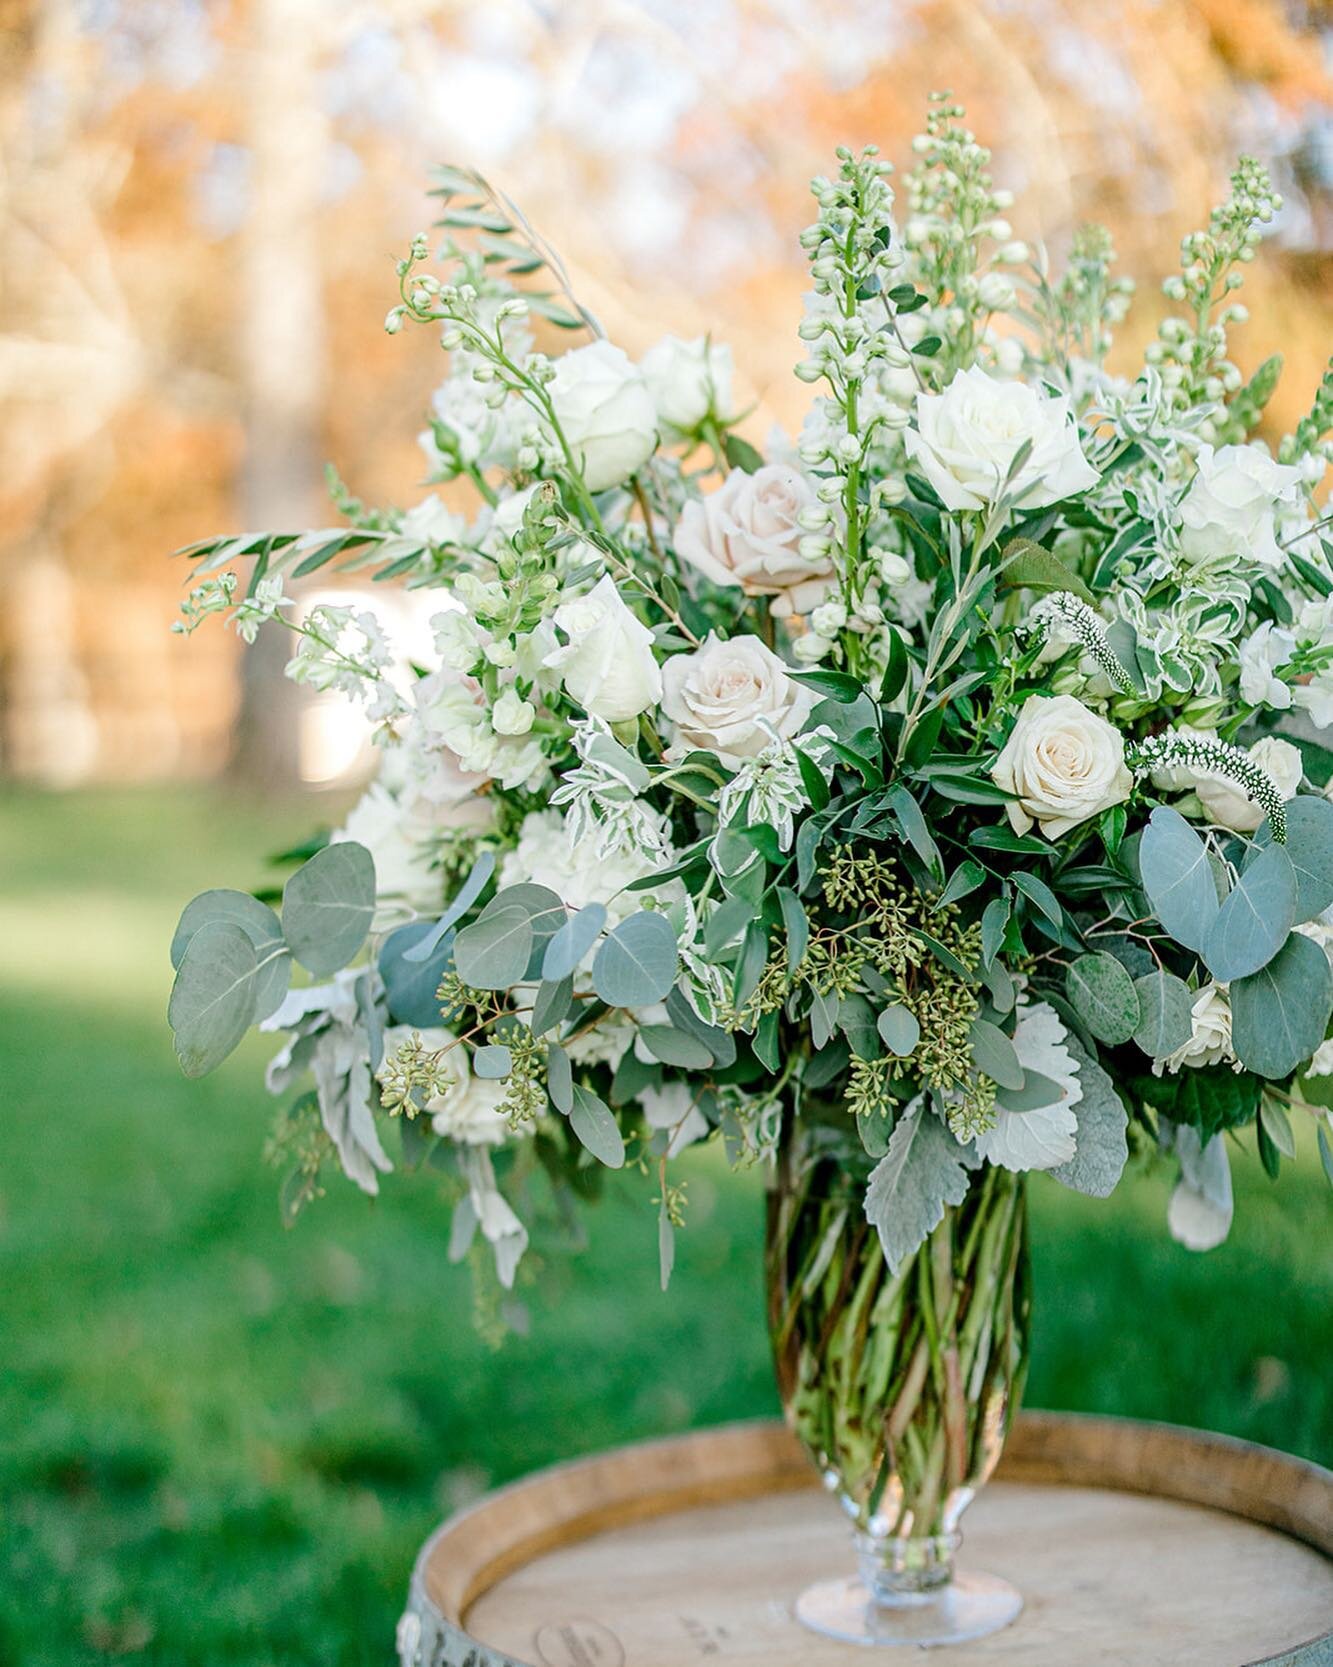 Wine barrel arrangements don&rsquo;t have to be rustic. We styled these florals in a footed glass vase for Julia and Tyler&rsquo;s wedding at Mount Ida for an added touch of elegance ✨
.
.⁠
.⁠⠀⁠⠀
🌸: @weddingsbyvogue 
📸: @kimjohnsonphoto 
📍: @mount